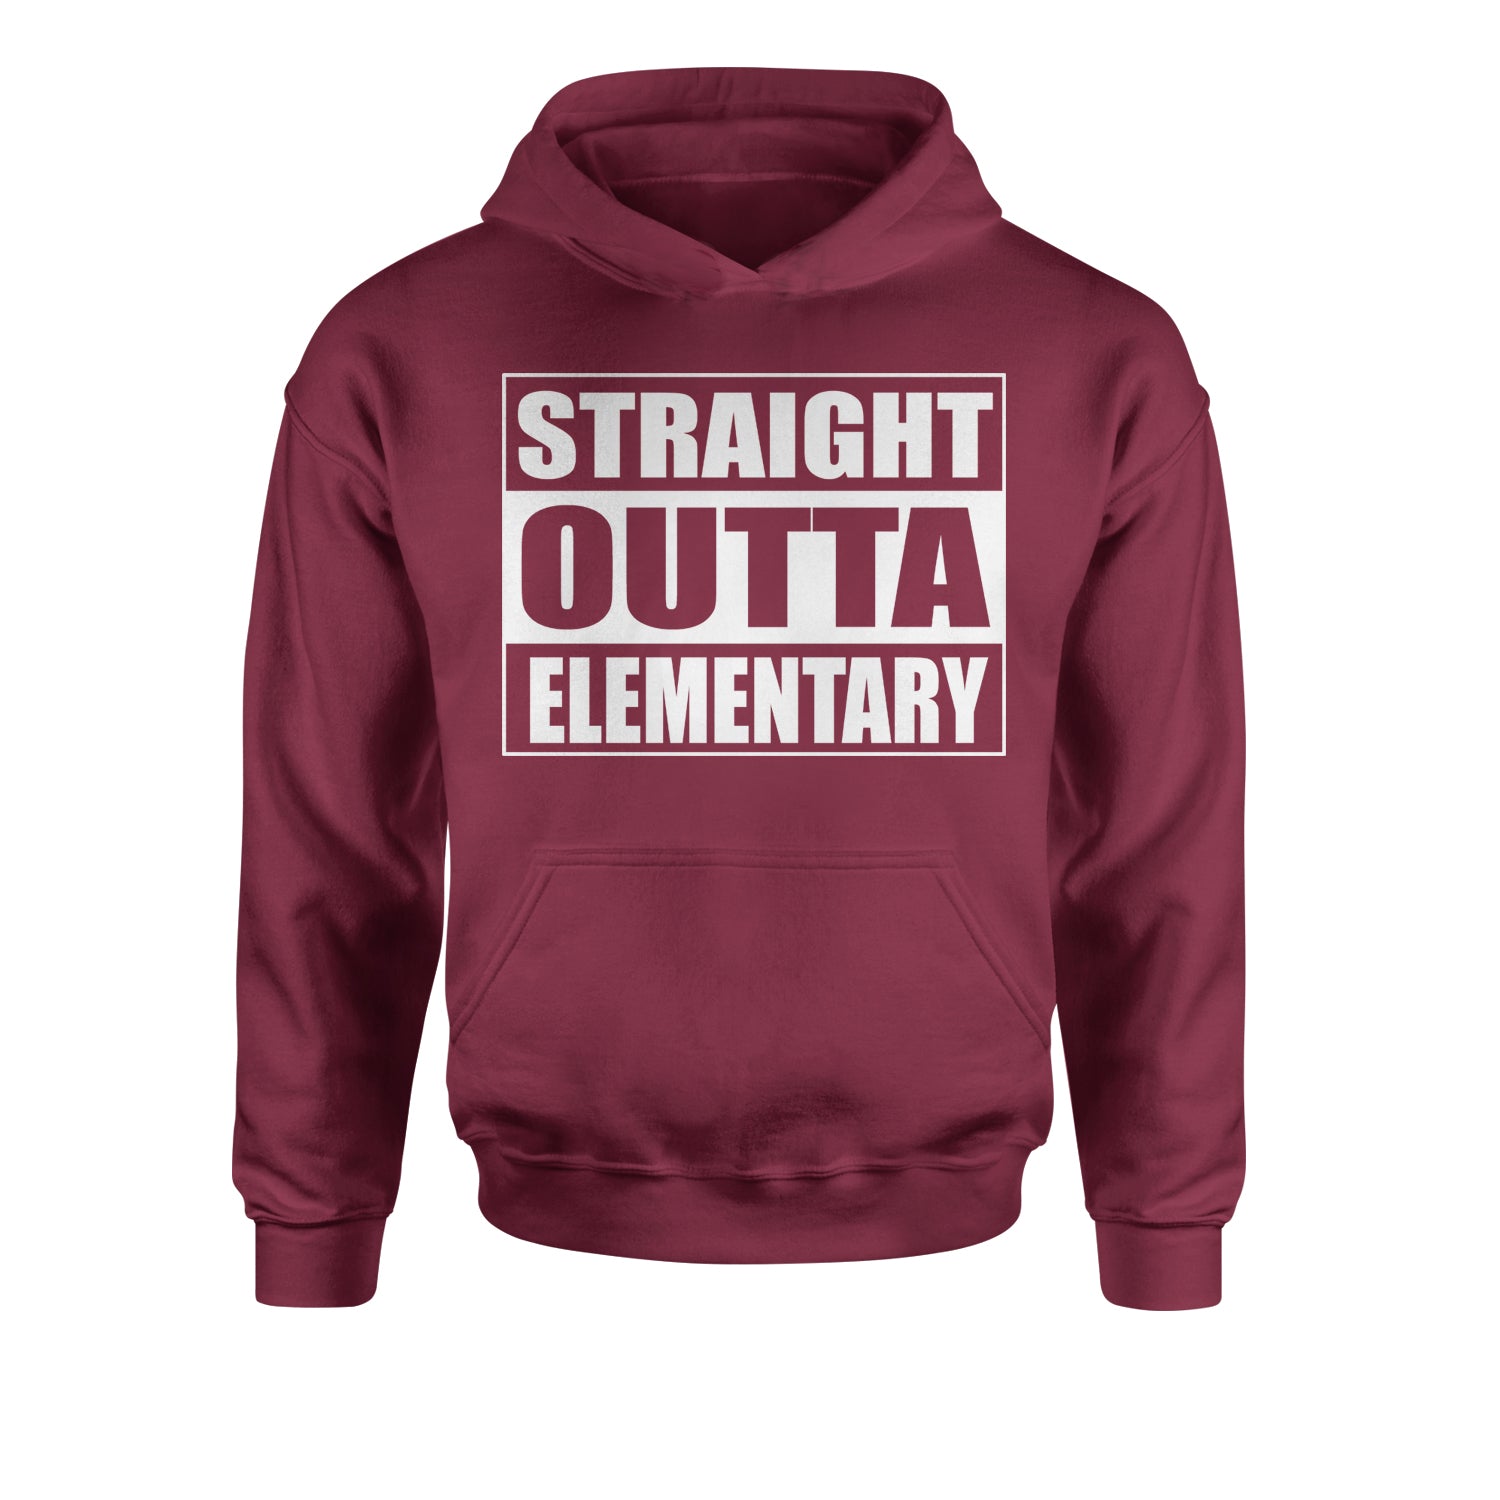 Straight Outta Elementary Youth-Sized Hoodie 2020, 2021, 2022, class, of, quarantine, queen by Expression Tees